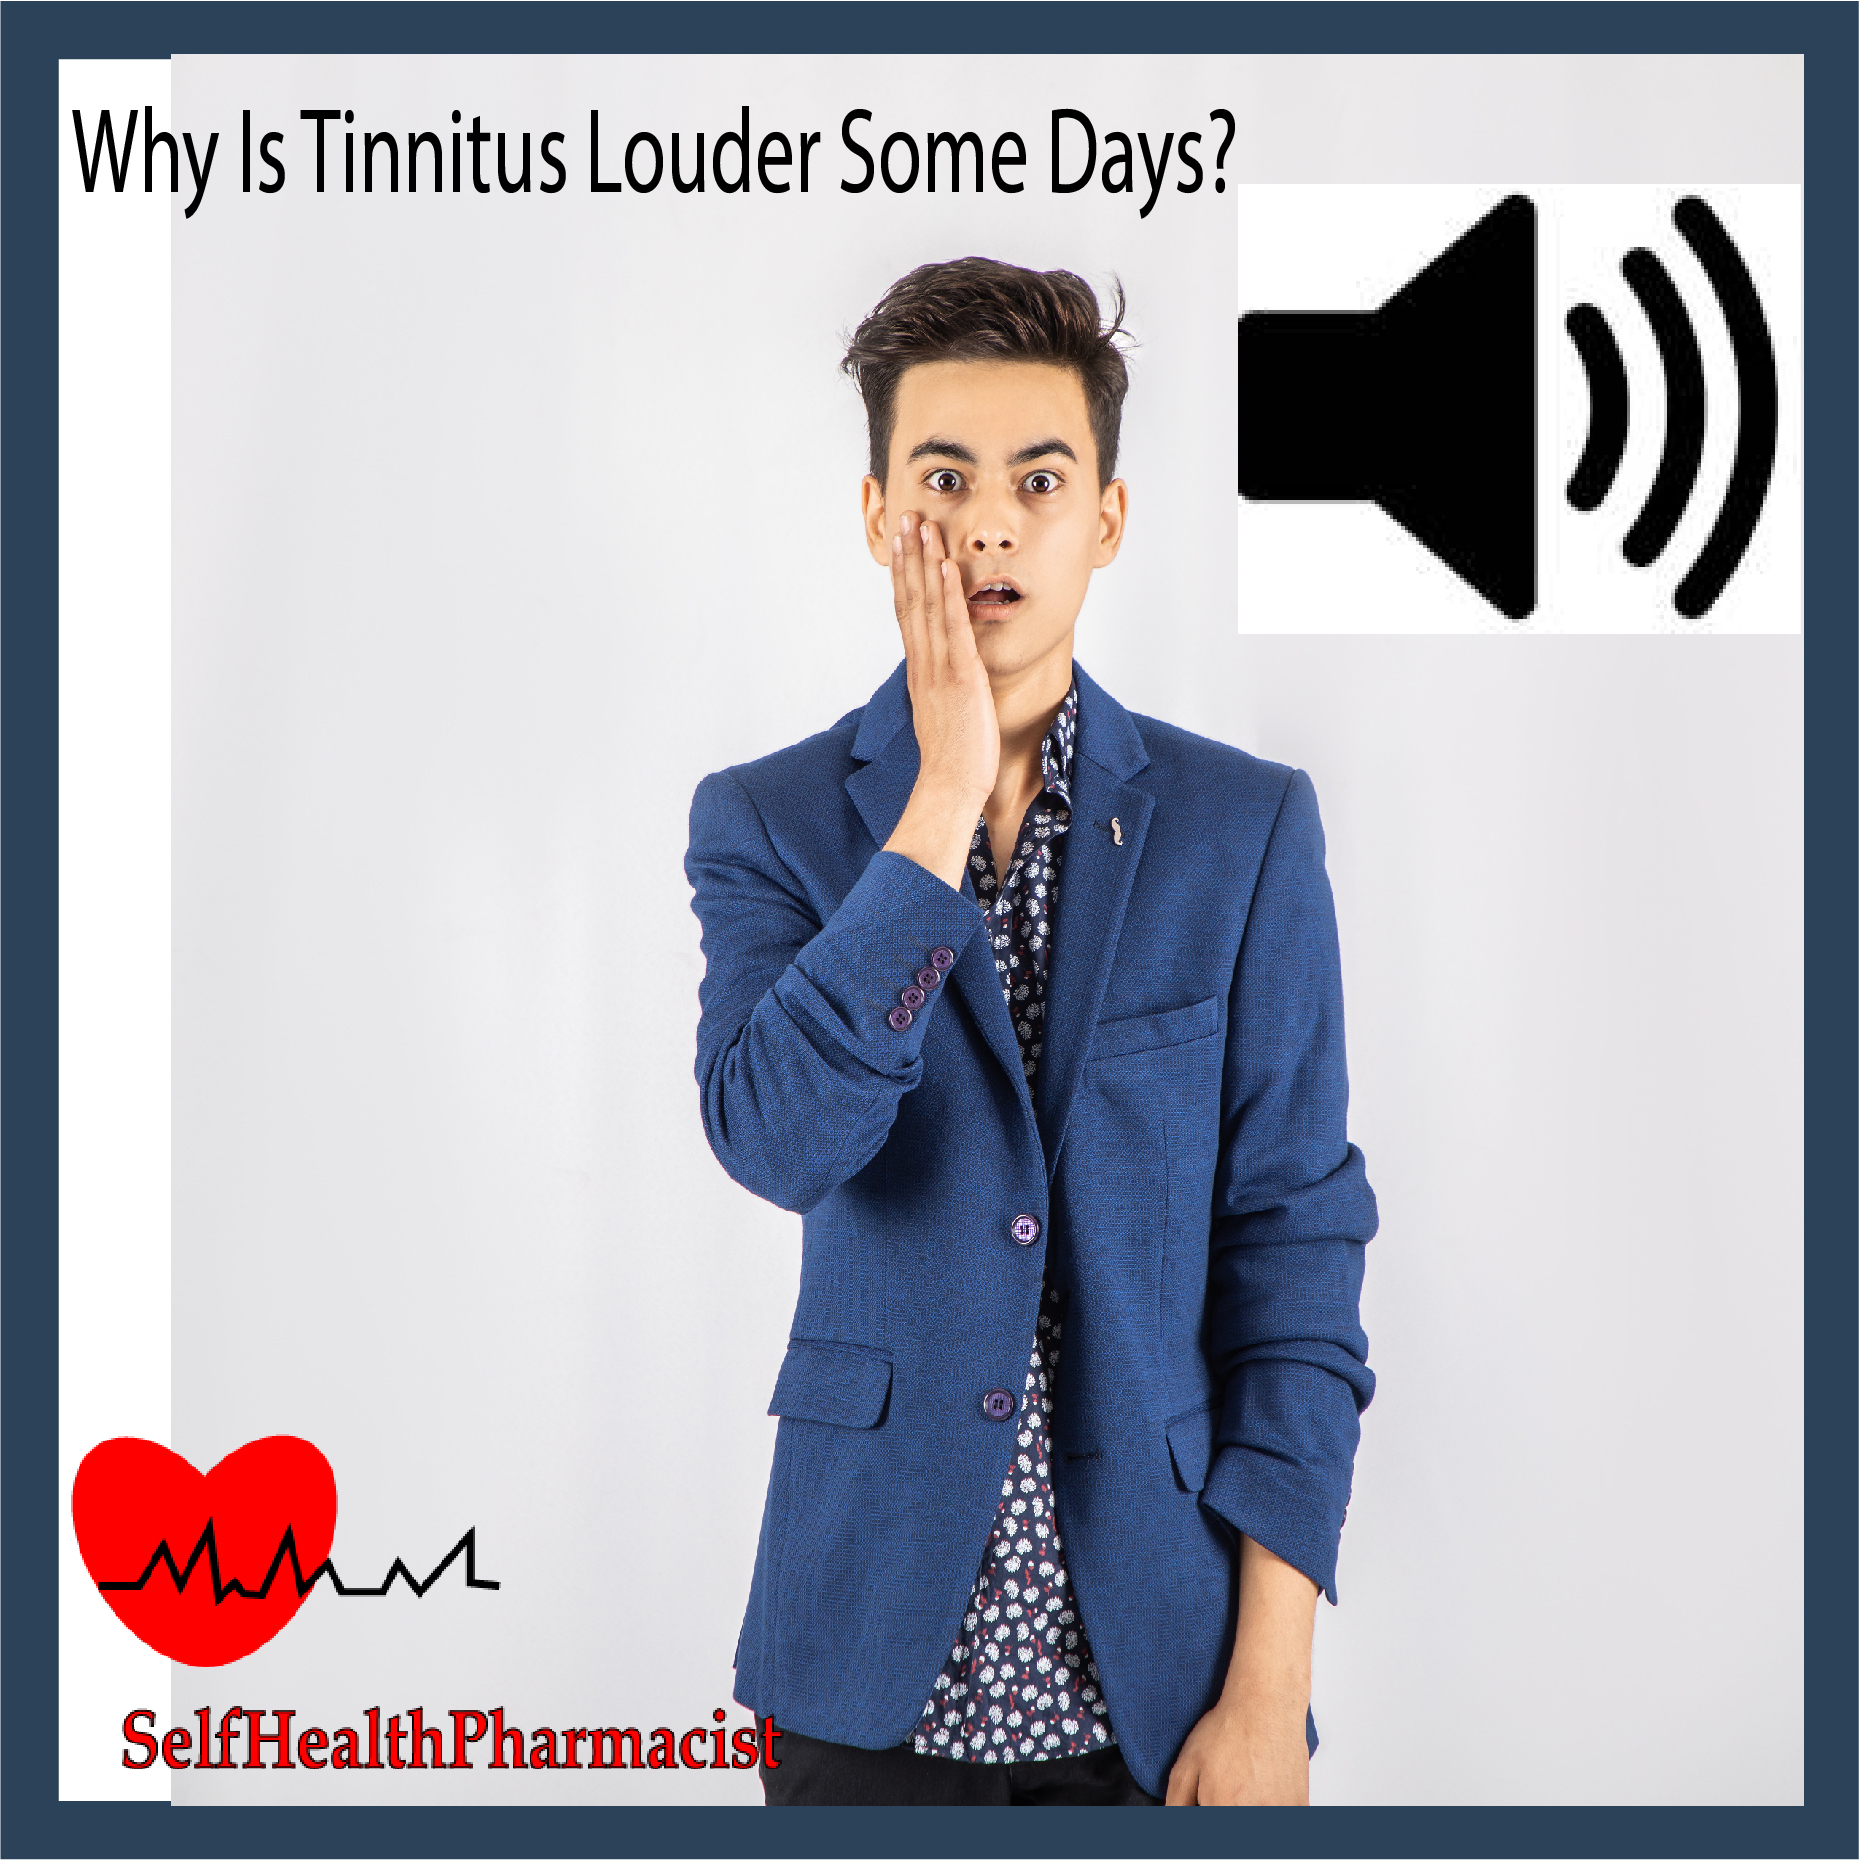 Why Is Tinnitus Louder Some Days?